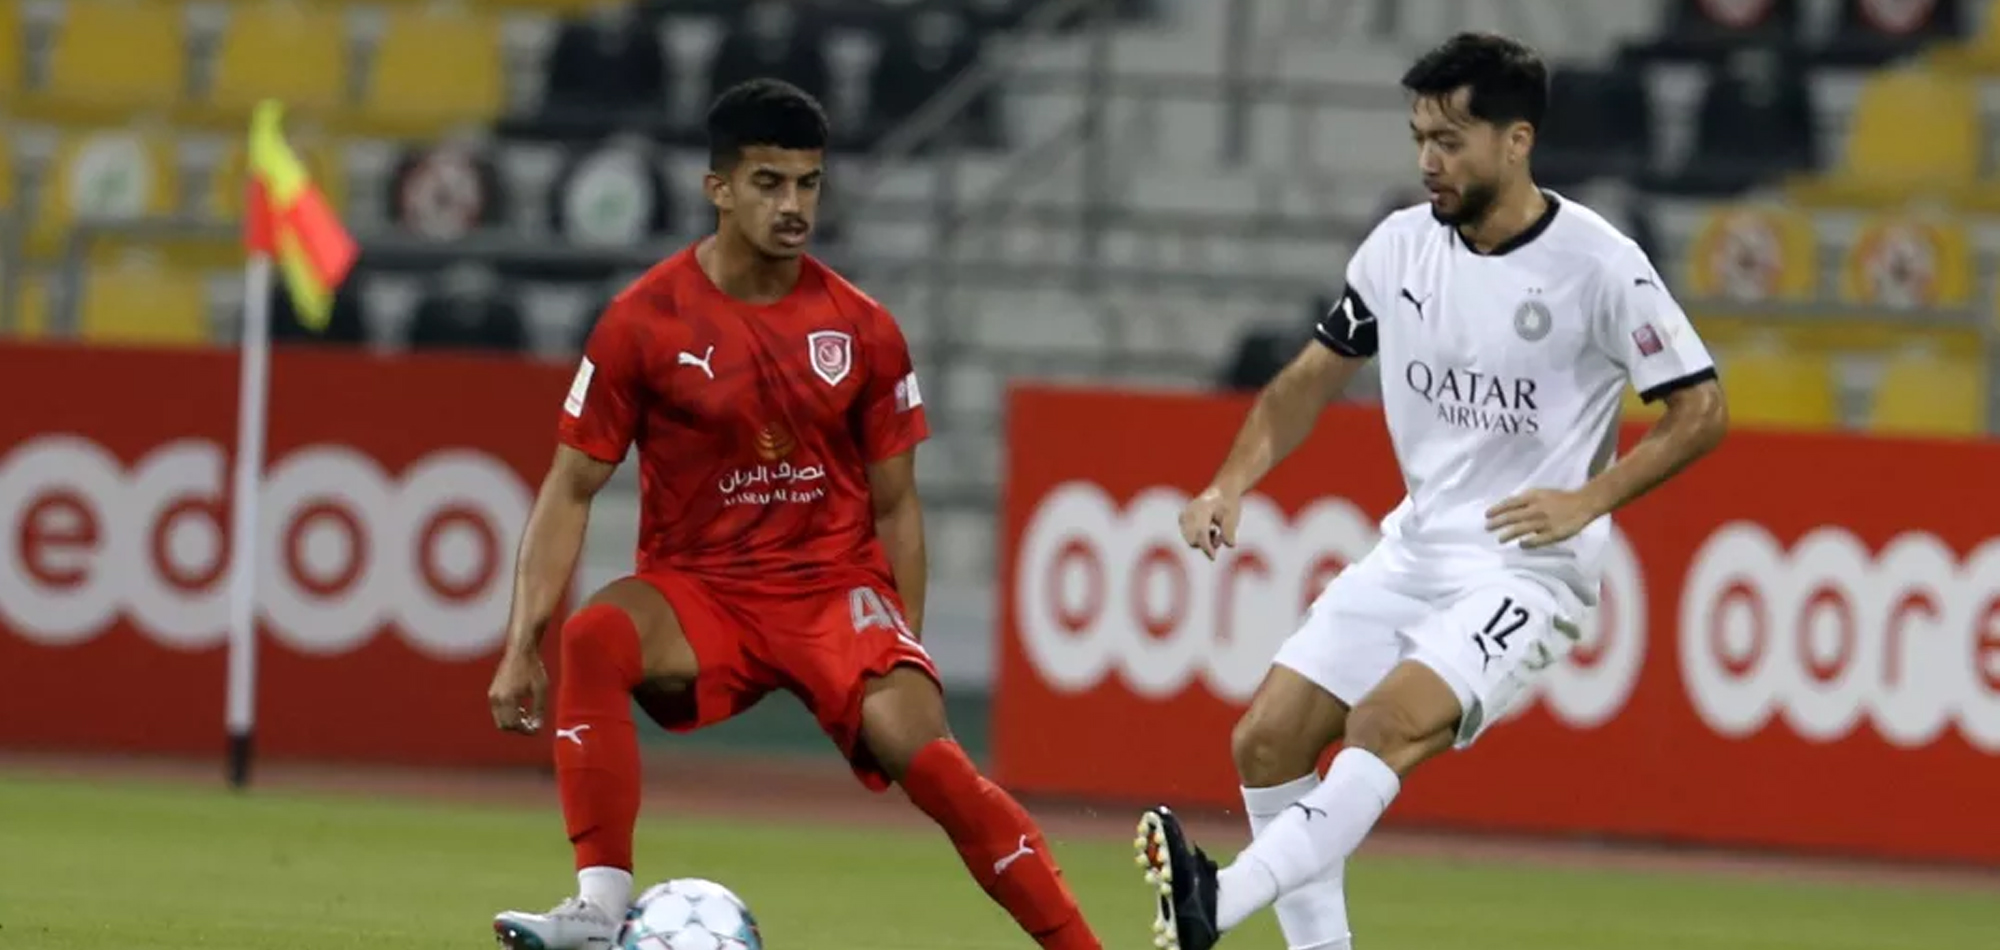 Al Sadd defeat Al Duhail in 2020-21 Ooredoo Cup’s postponed match from Round 1